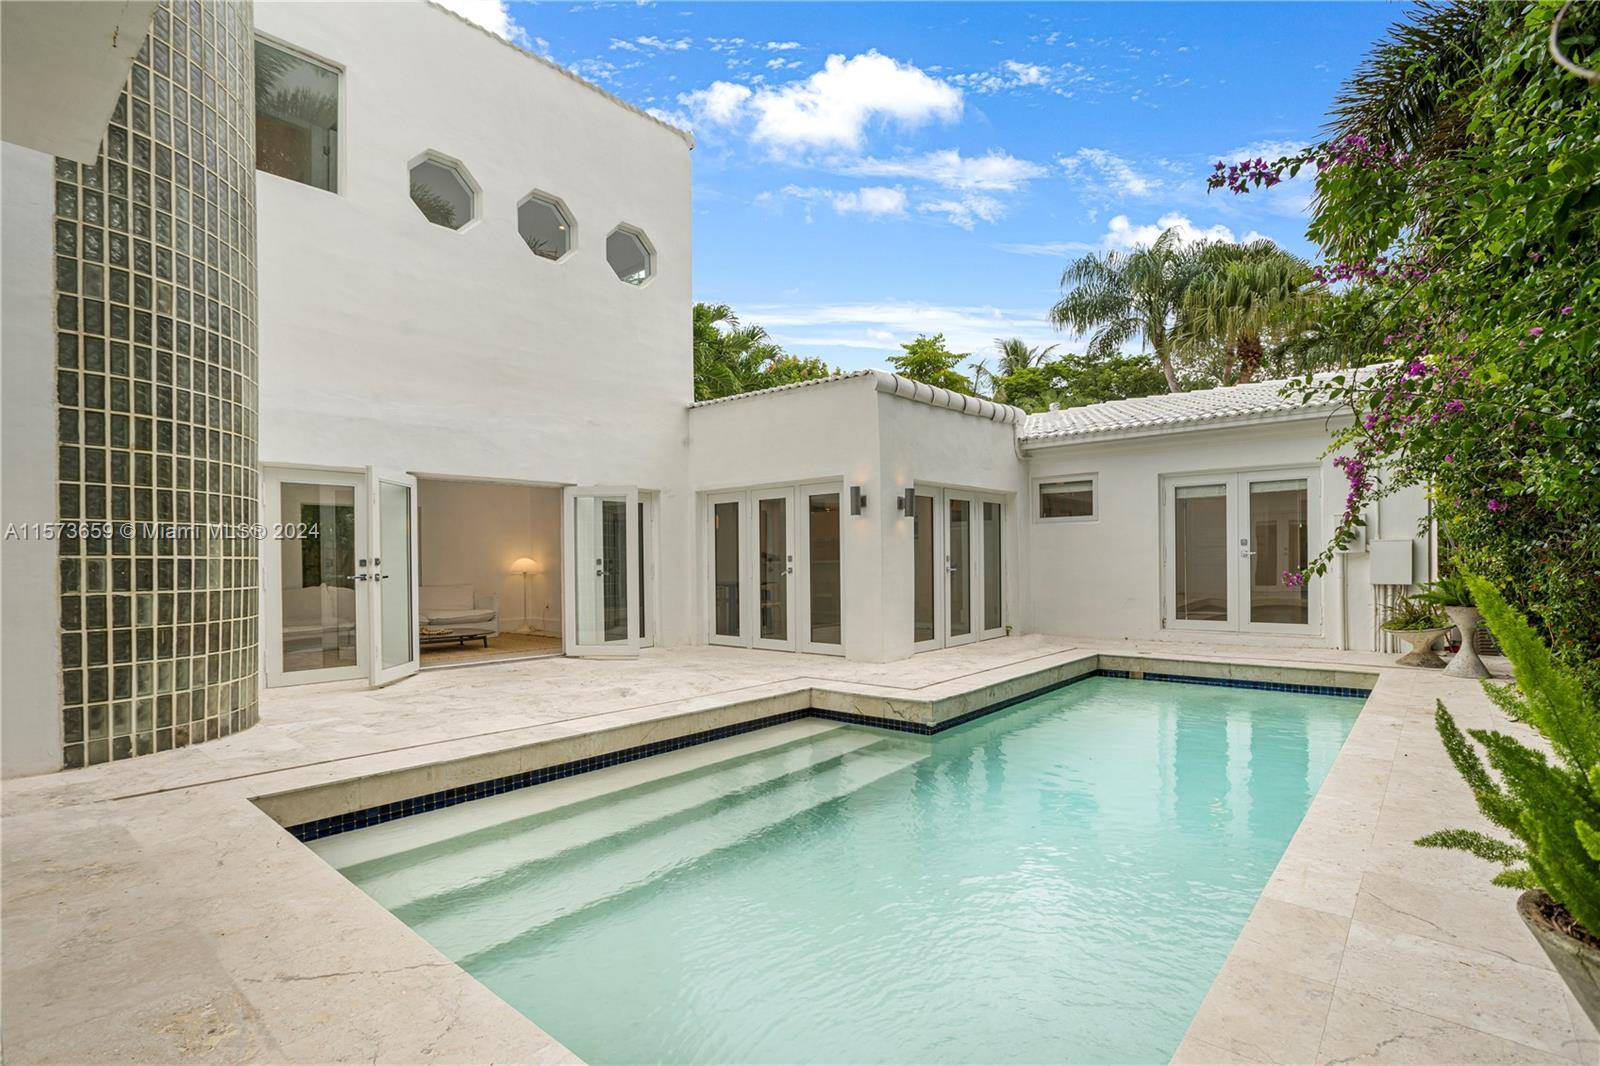 Multilevel home with St Barts villa vibes in a serene Coconut Grove location.